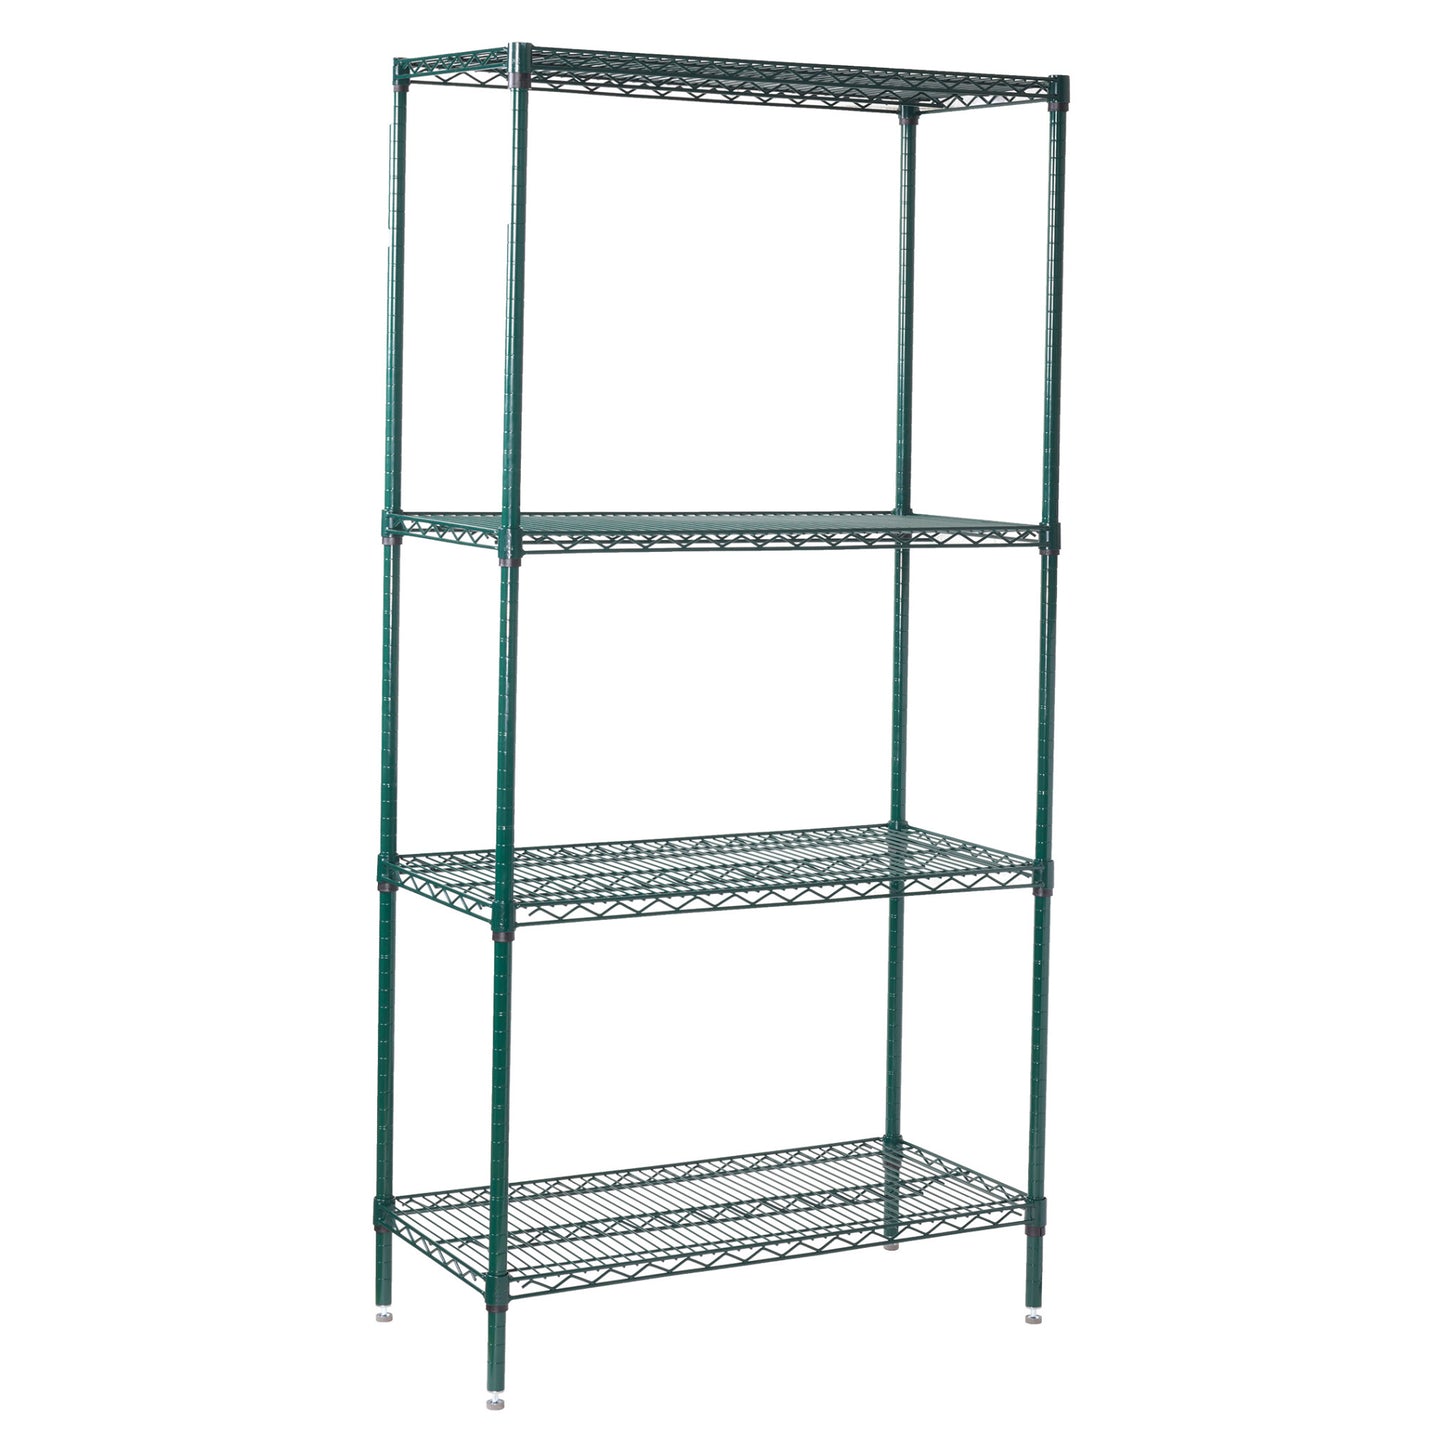 VEXS-1836 - 4-Tier Wire Shelving Set, Epoxy-Coated - 18 x 36 x 72